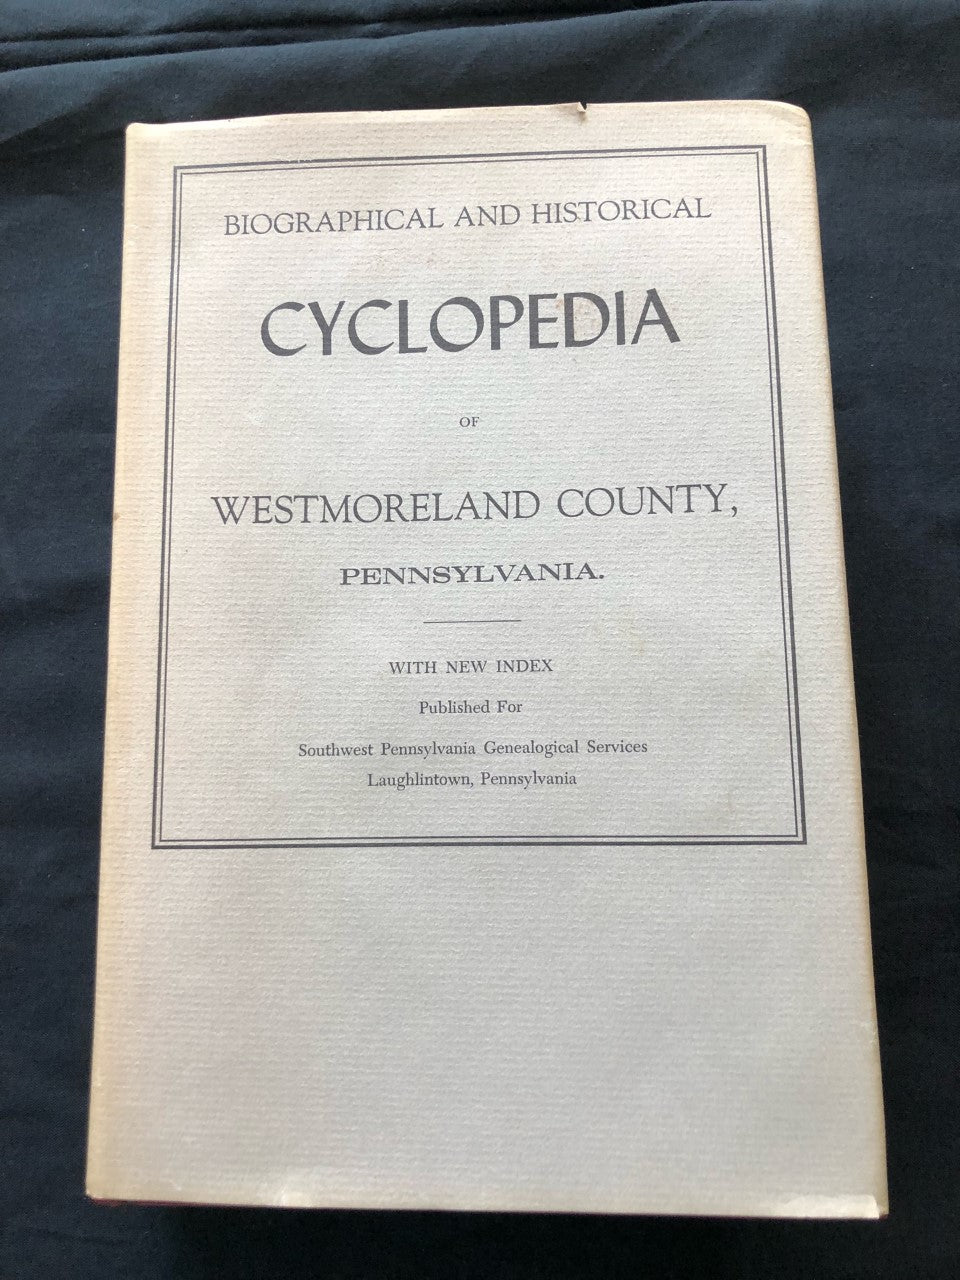 Biographical and Historical Cyclopedia of Westmoreland County, Pennsylvania